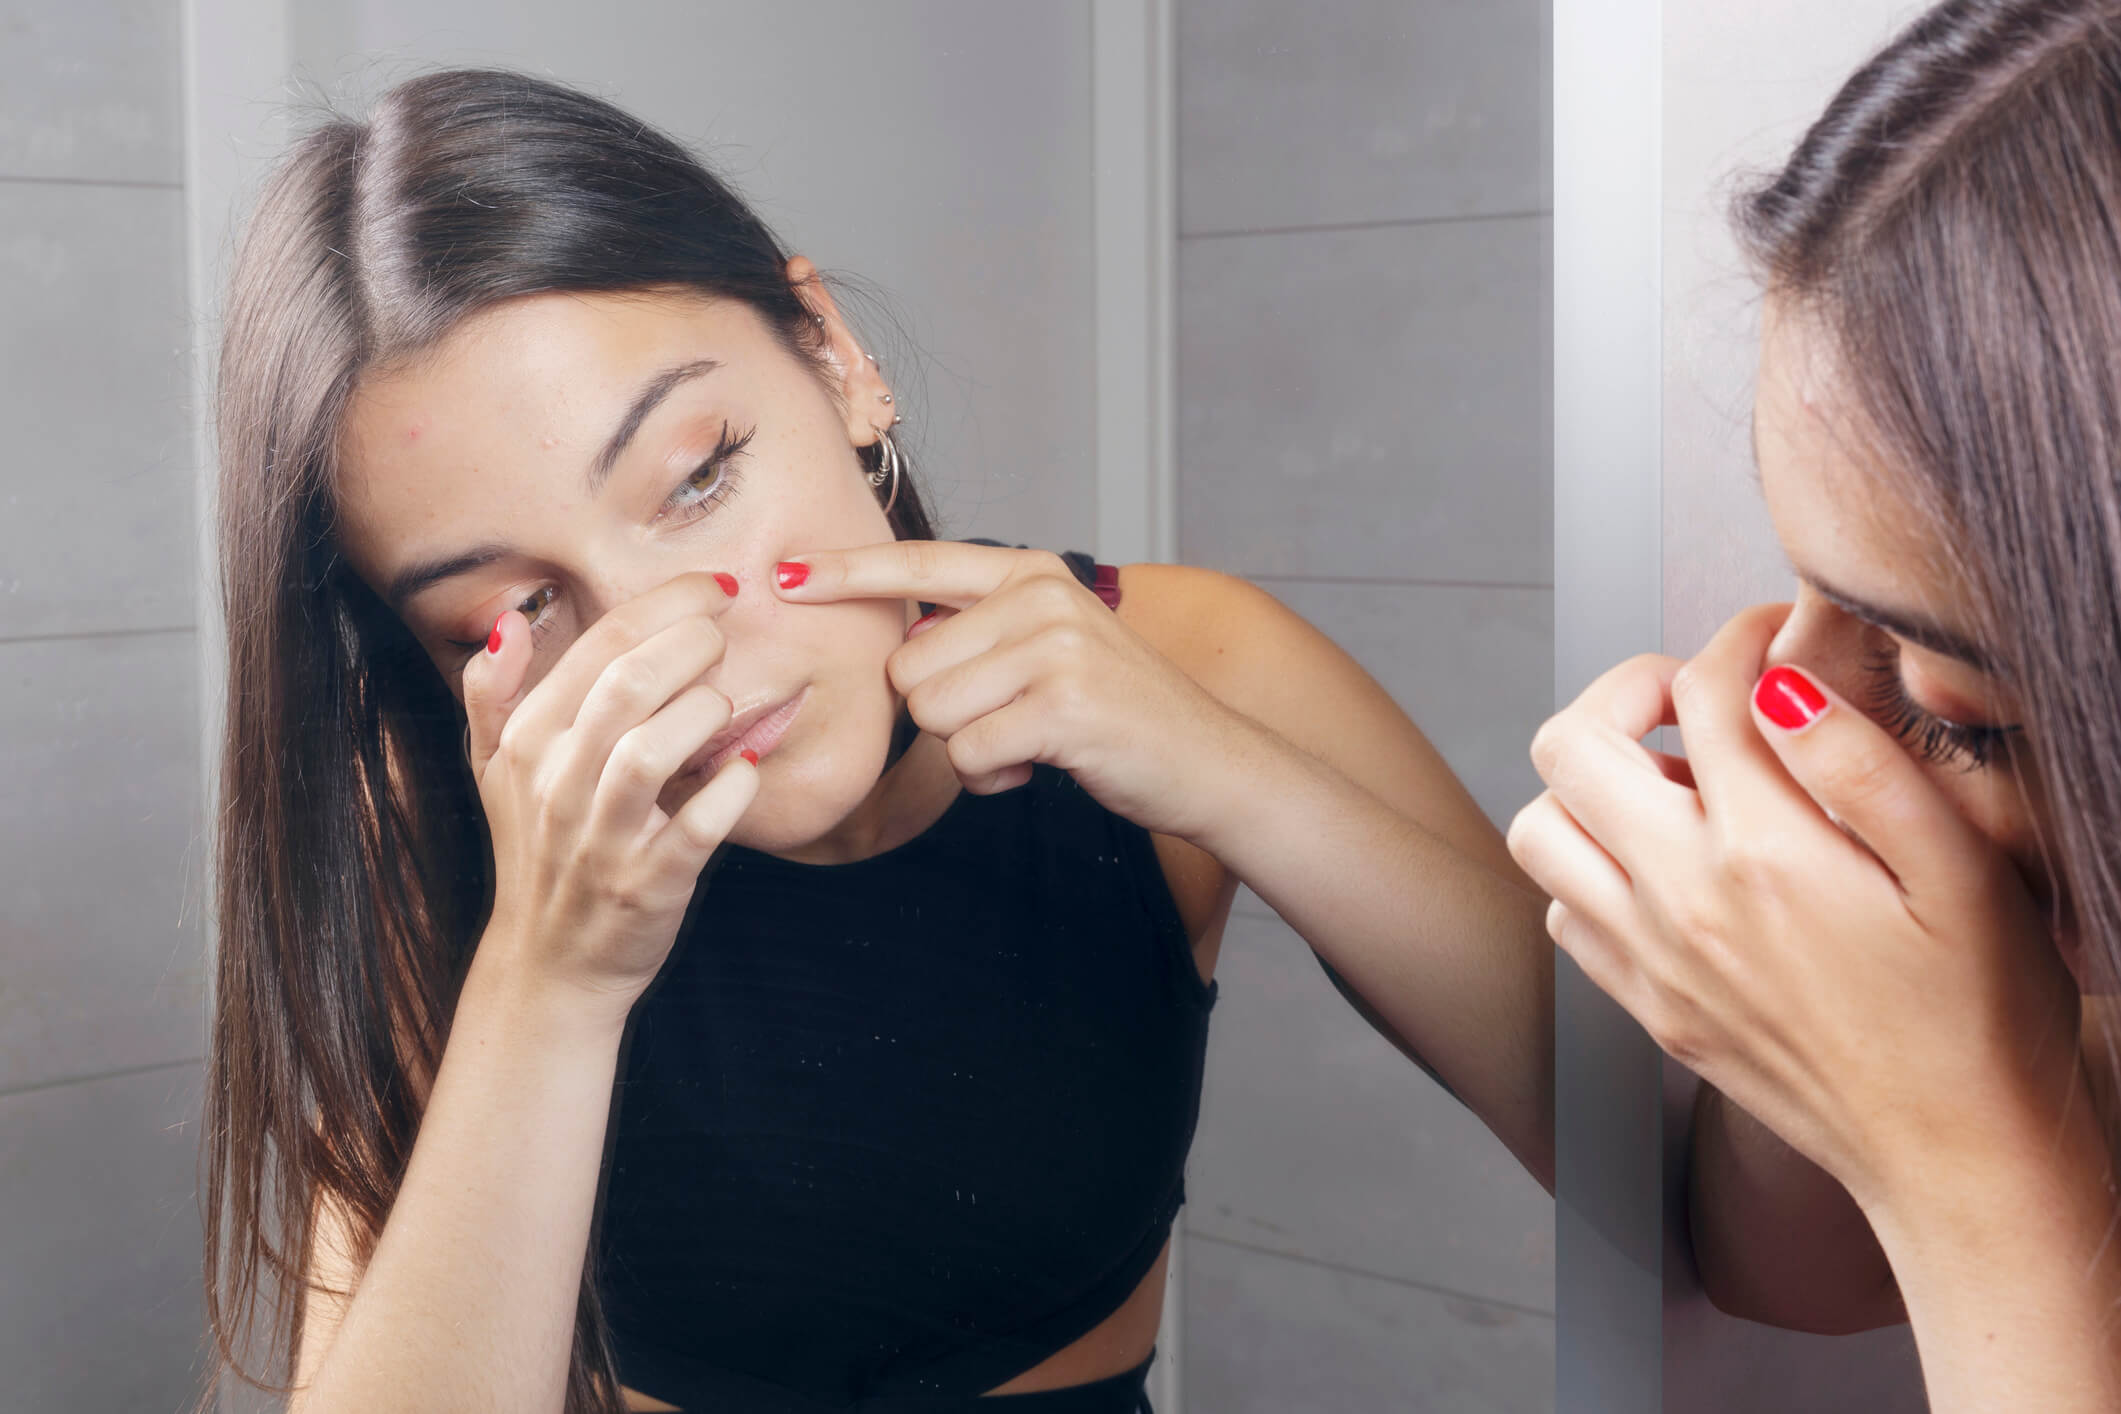 diana brighton recommends popping pimples in private area video pic